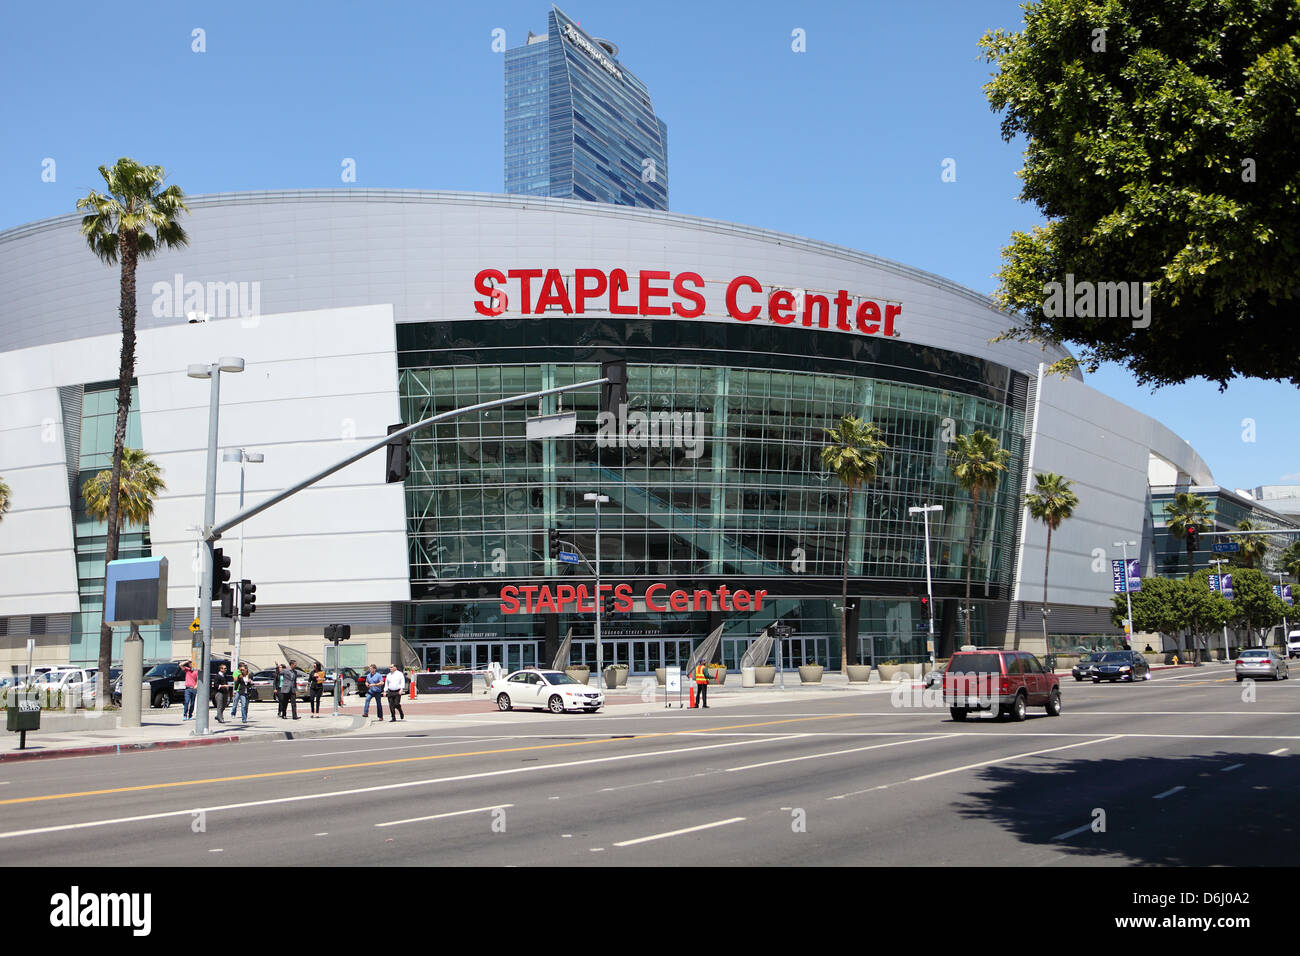 LOS ANGELES, CALIFORNIA, USA - April 16, 2013 - The Staples Center in Downtown Los Angeles on April 16, 2013. Stock Photo